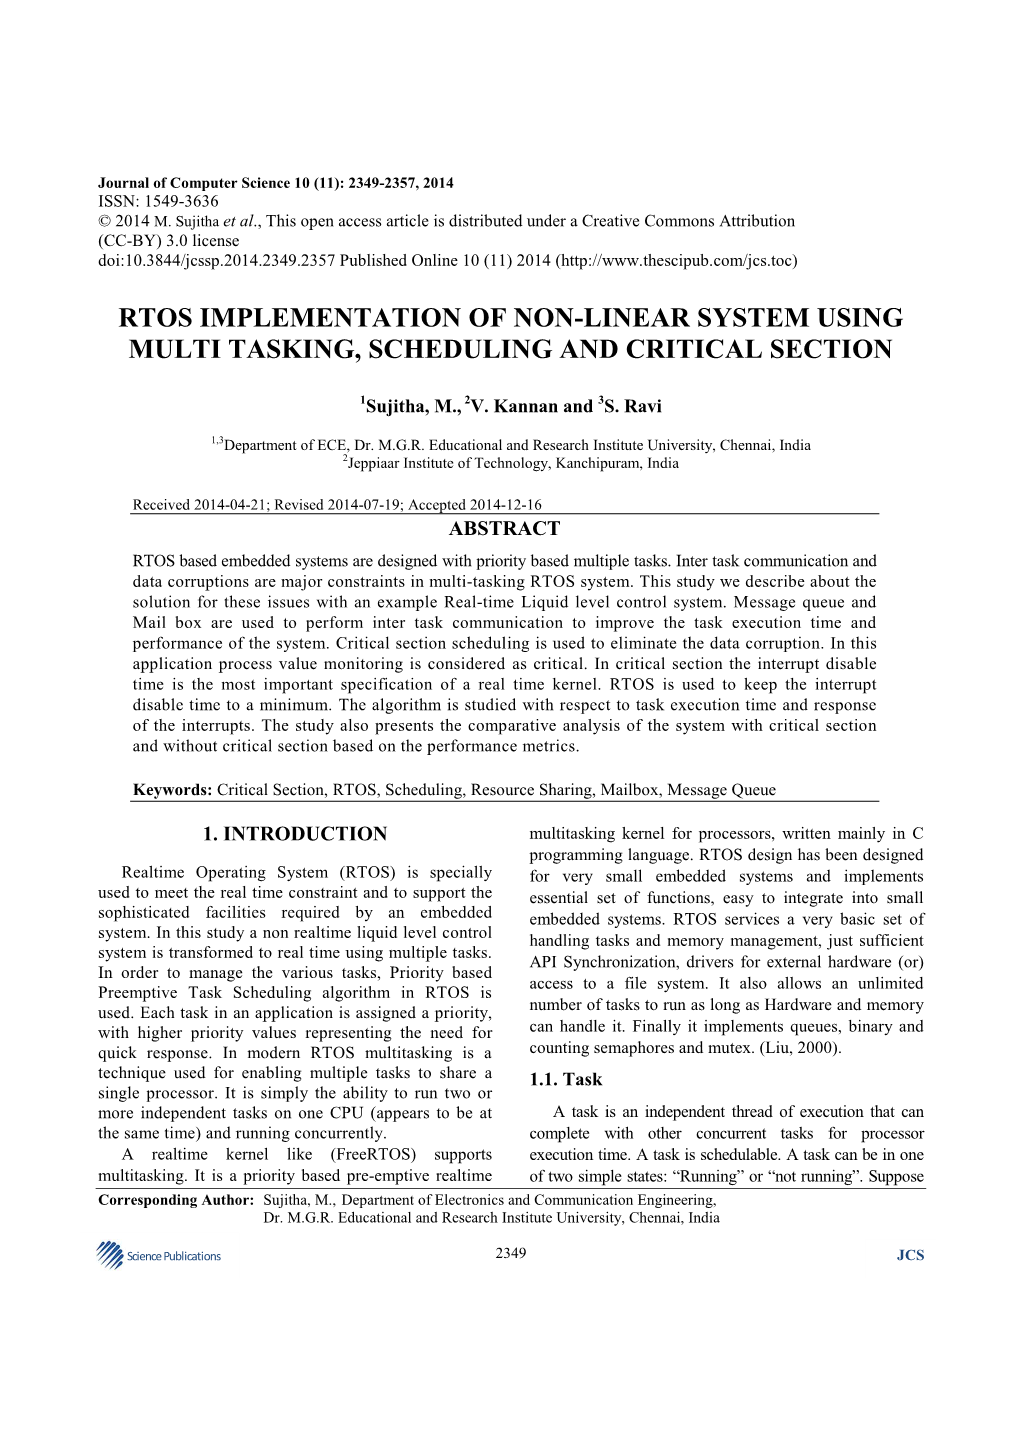 Rtos Implementation of Non-Linear System Using Multi Tasking, Scheduling and Critical Section